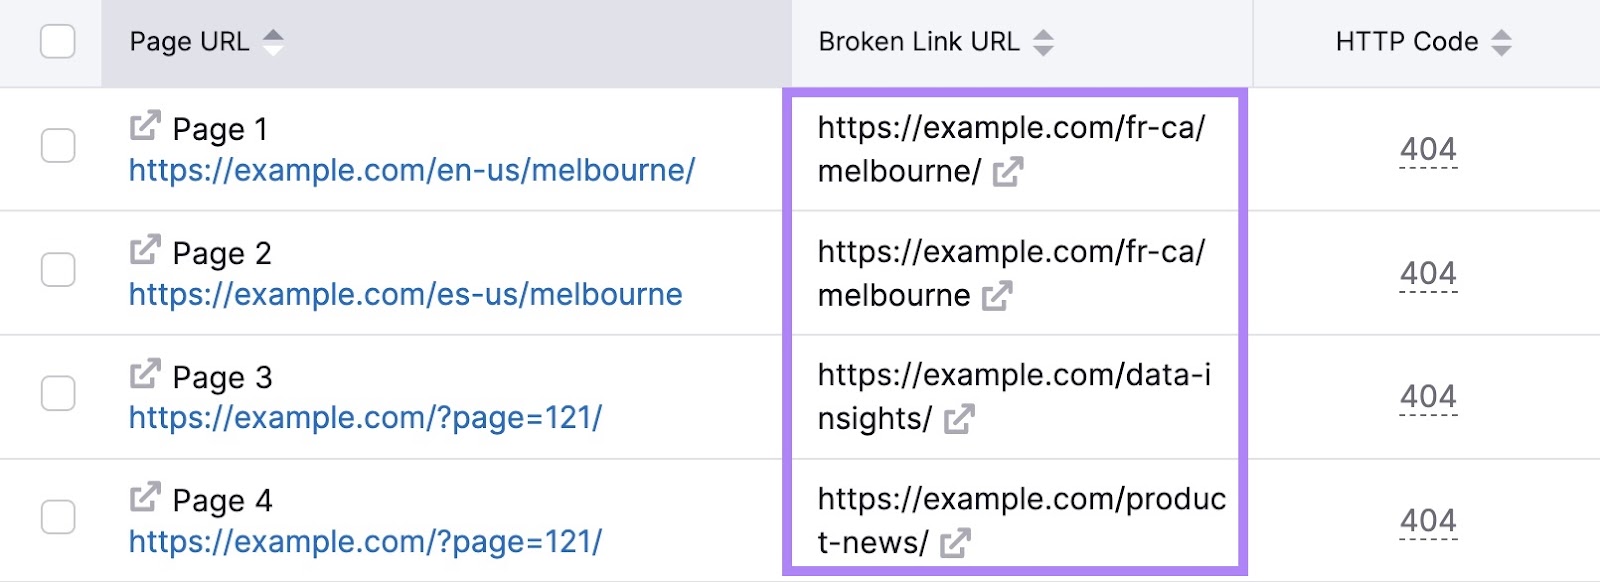 Site Audit results for broken links and 404 errors.